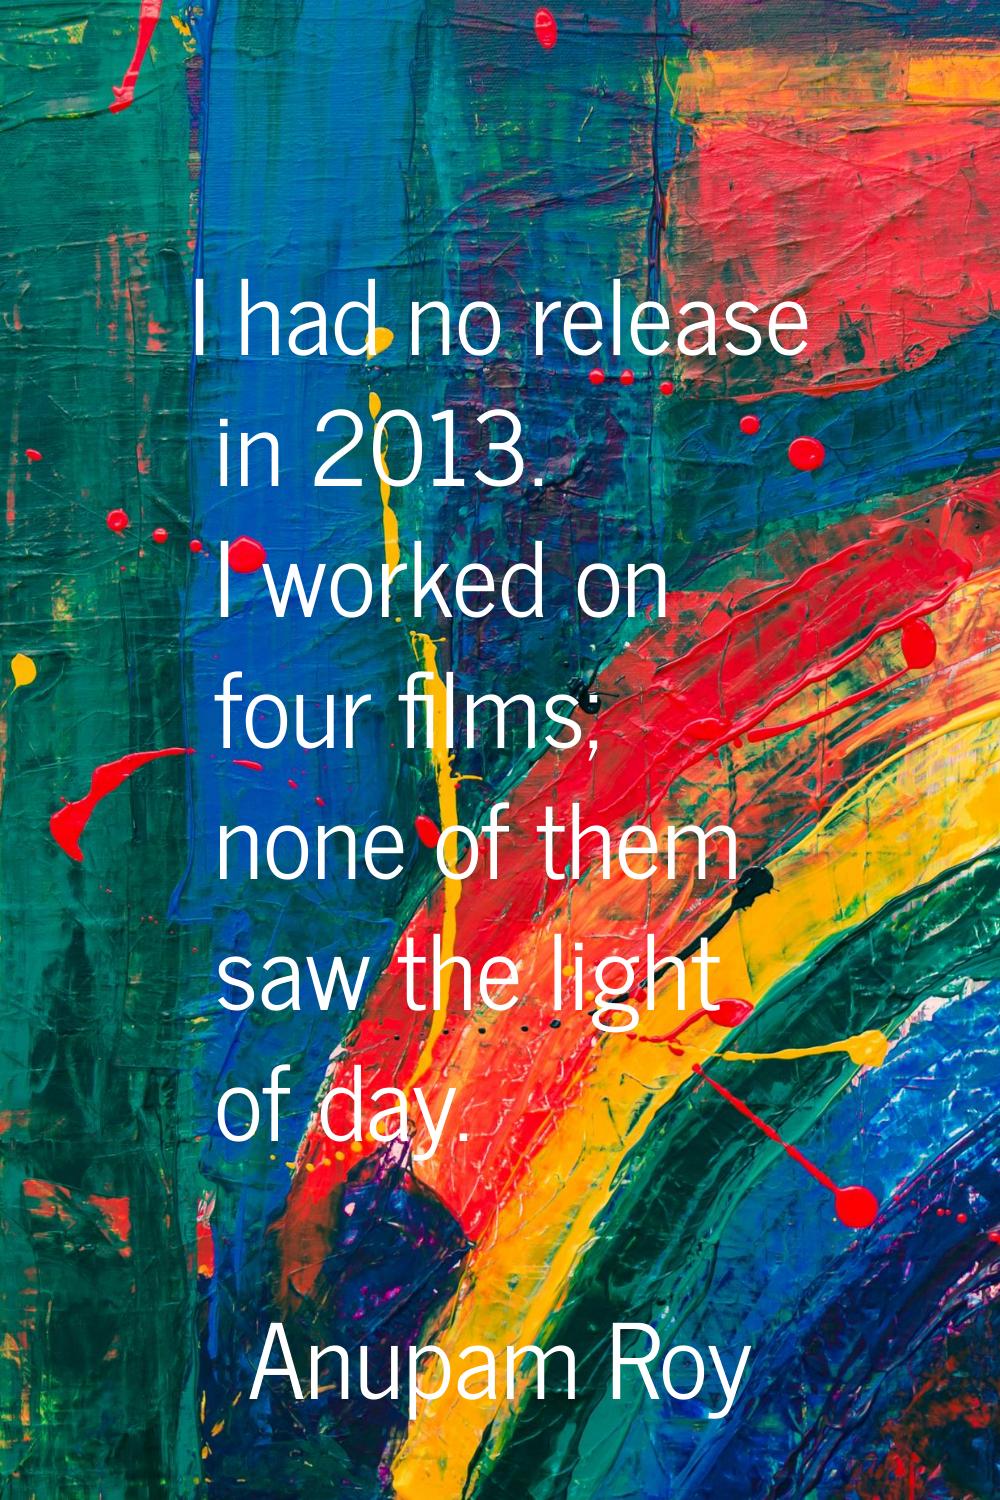 I had no release in 2013. I worked on four films; none of them saw the light of day.